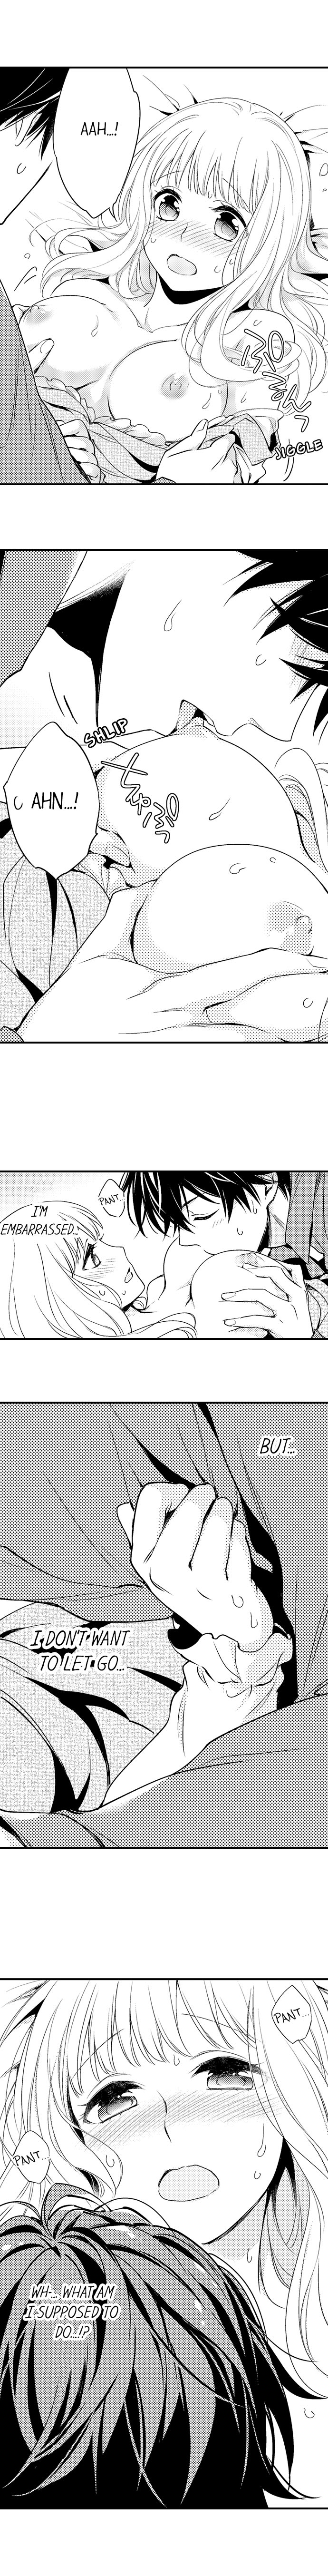 Let Me Sleep with You, Haruomi-kun! Ch.3